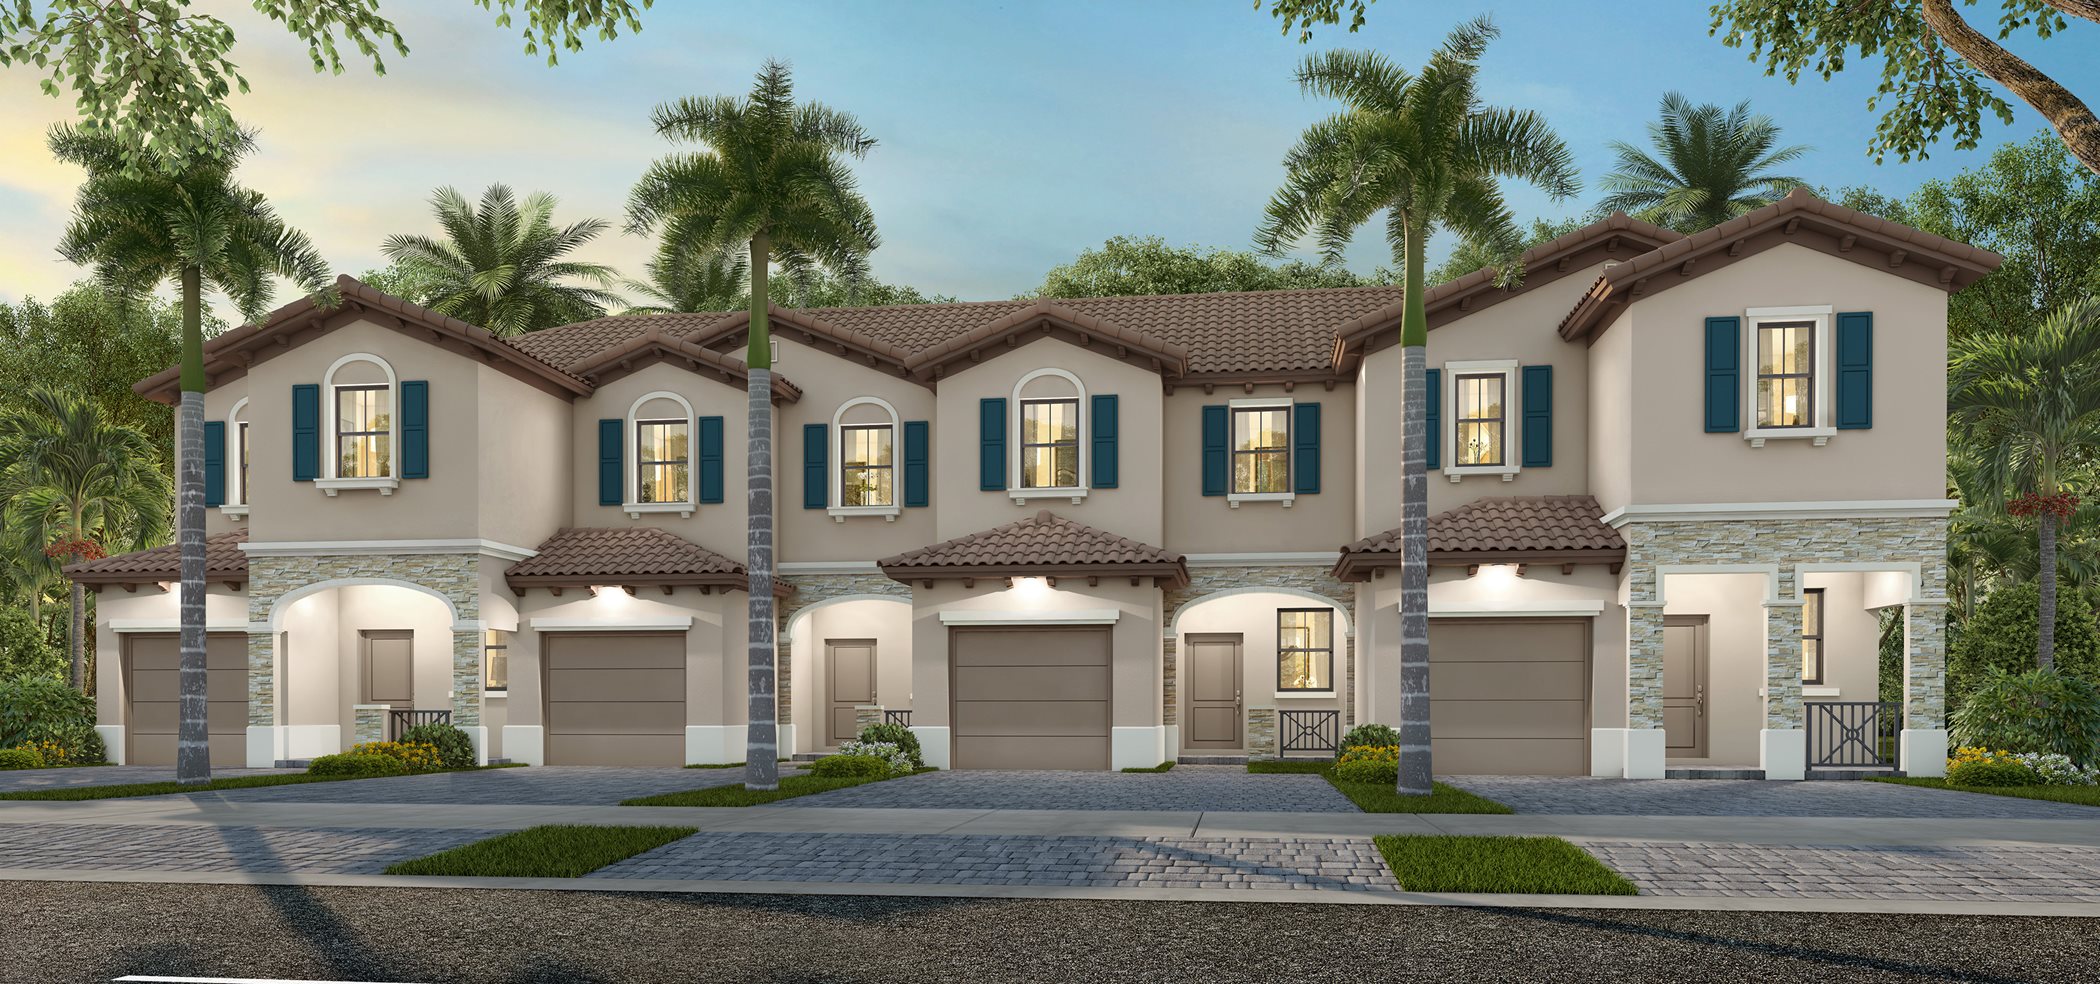 Spanish exterior rendering of townhome building